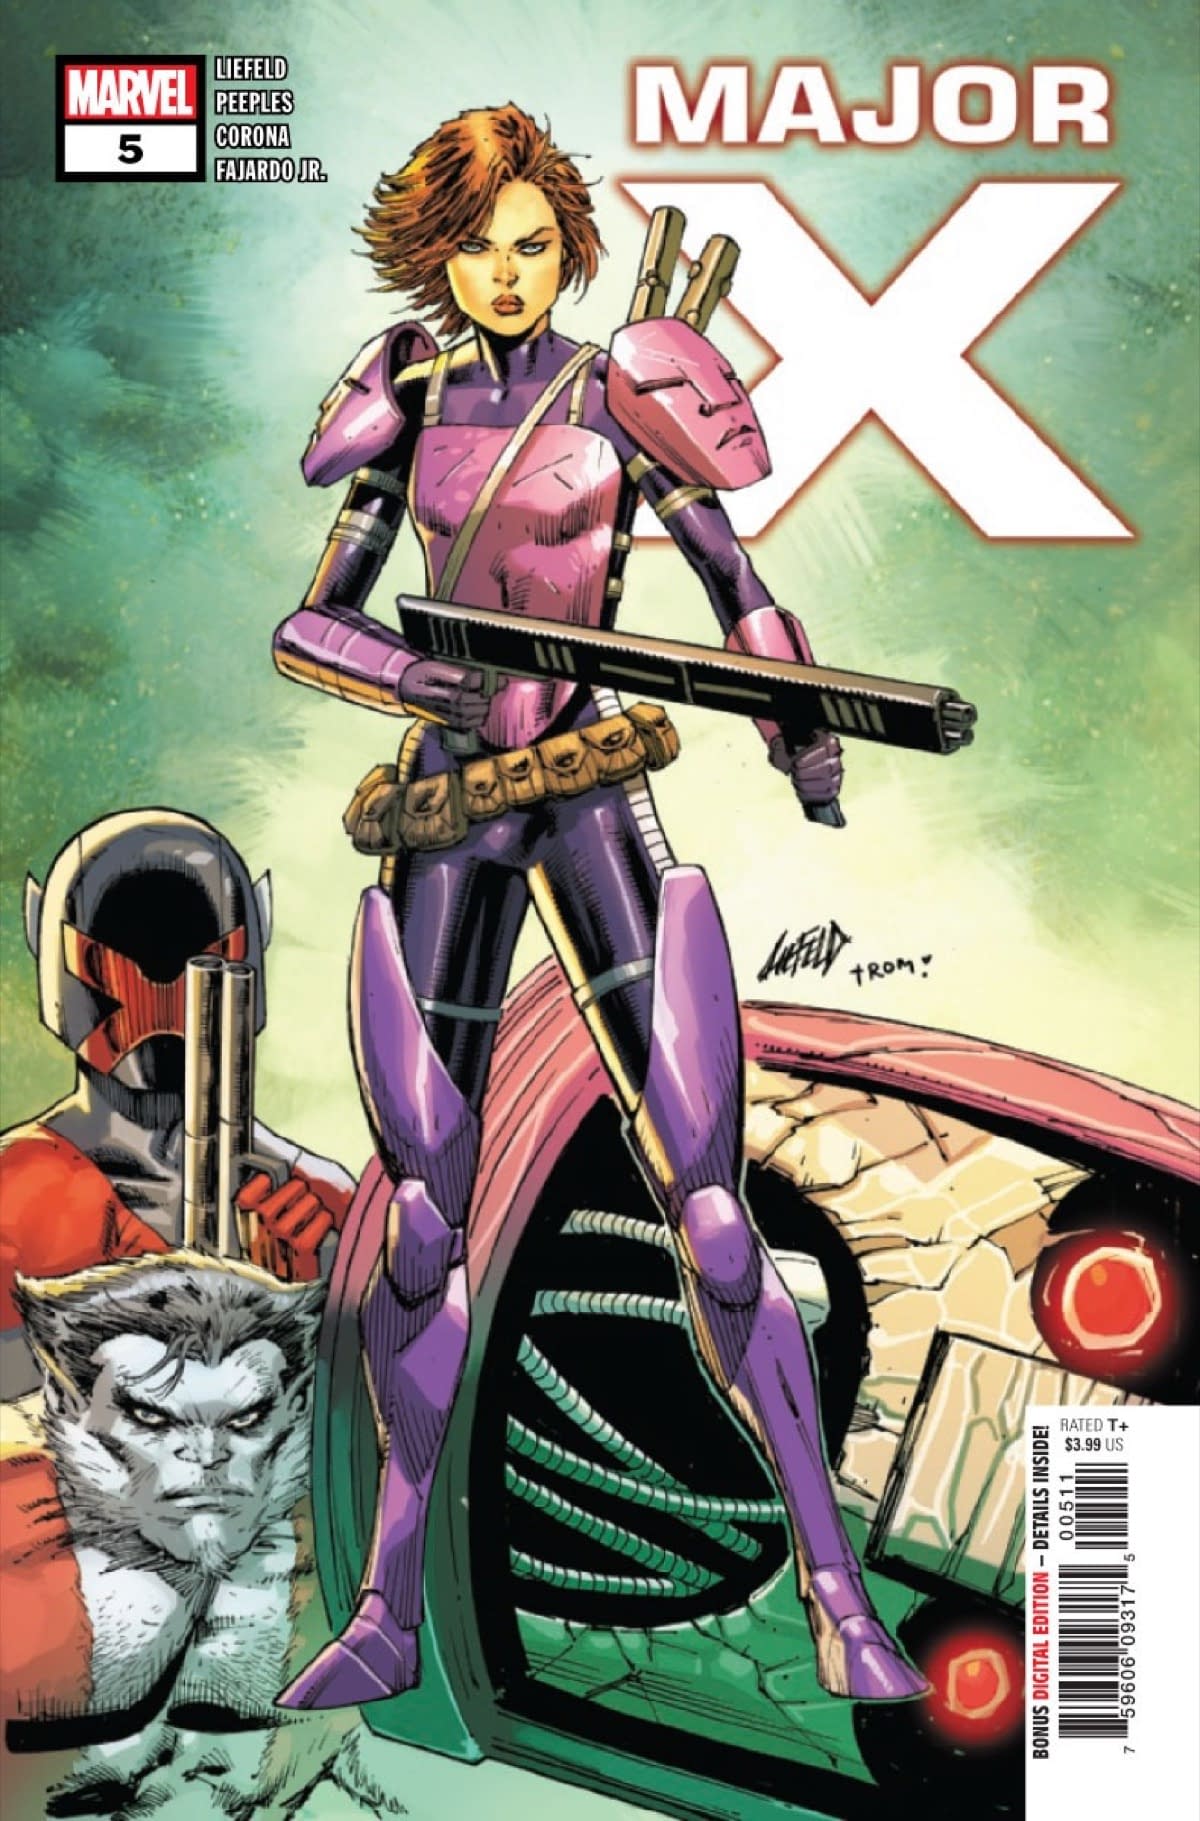 Major X #5 Preview